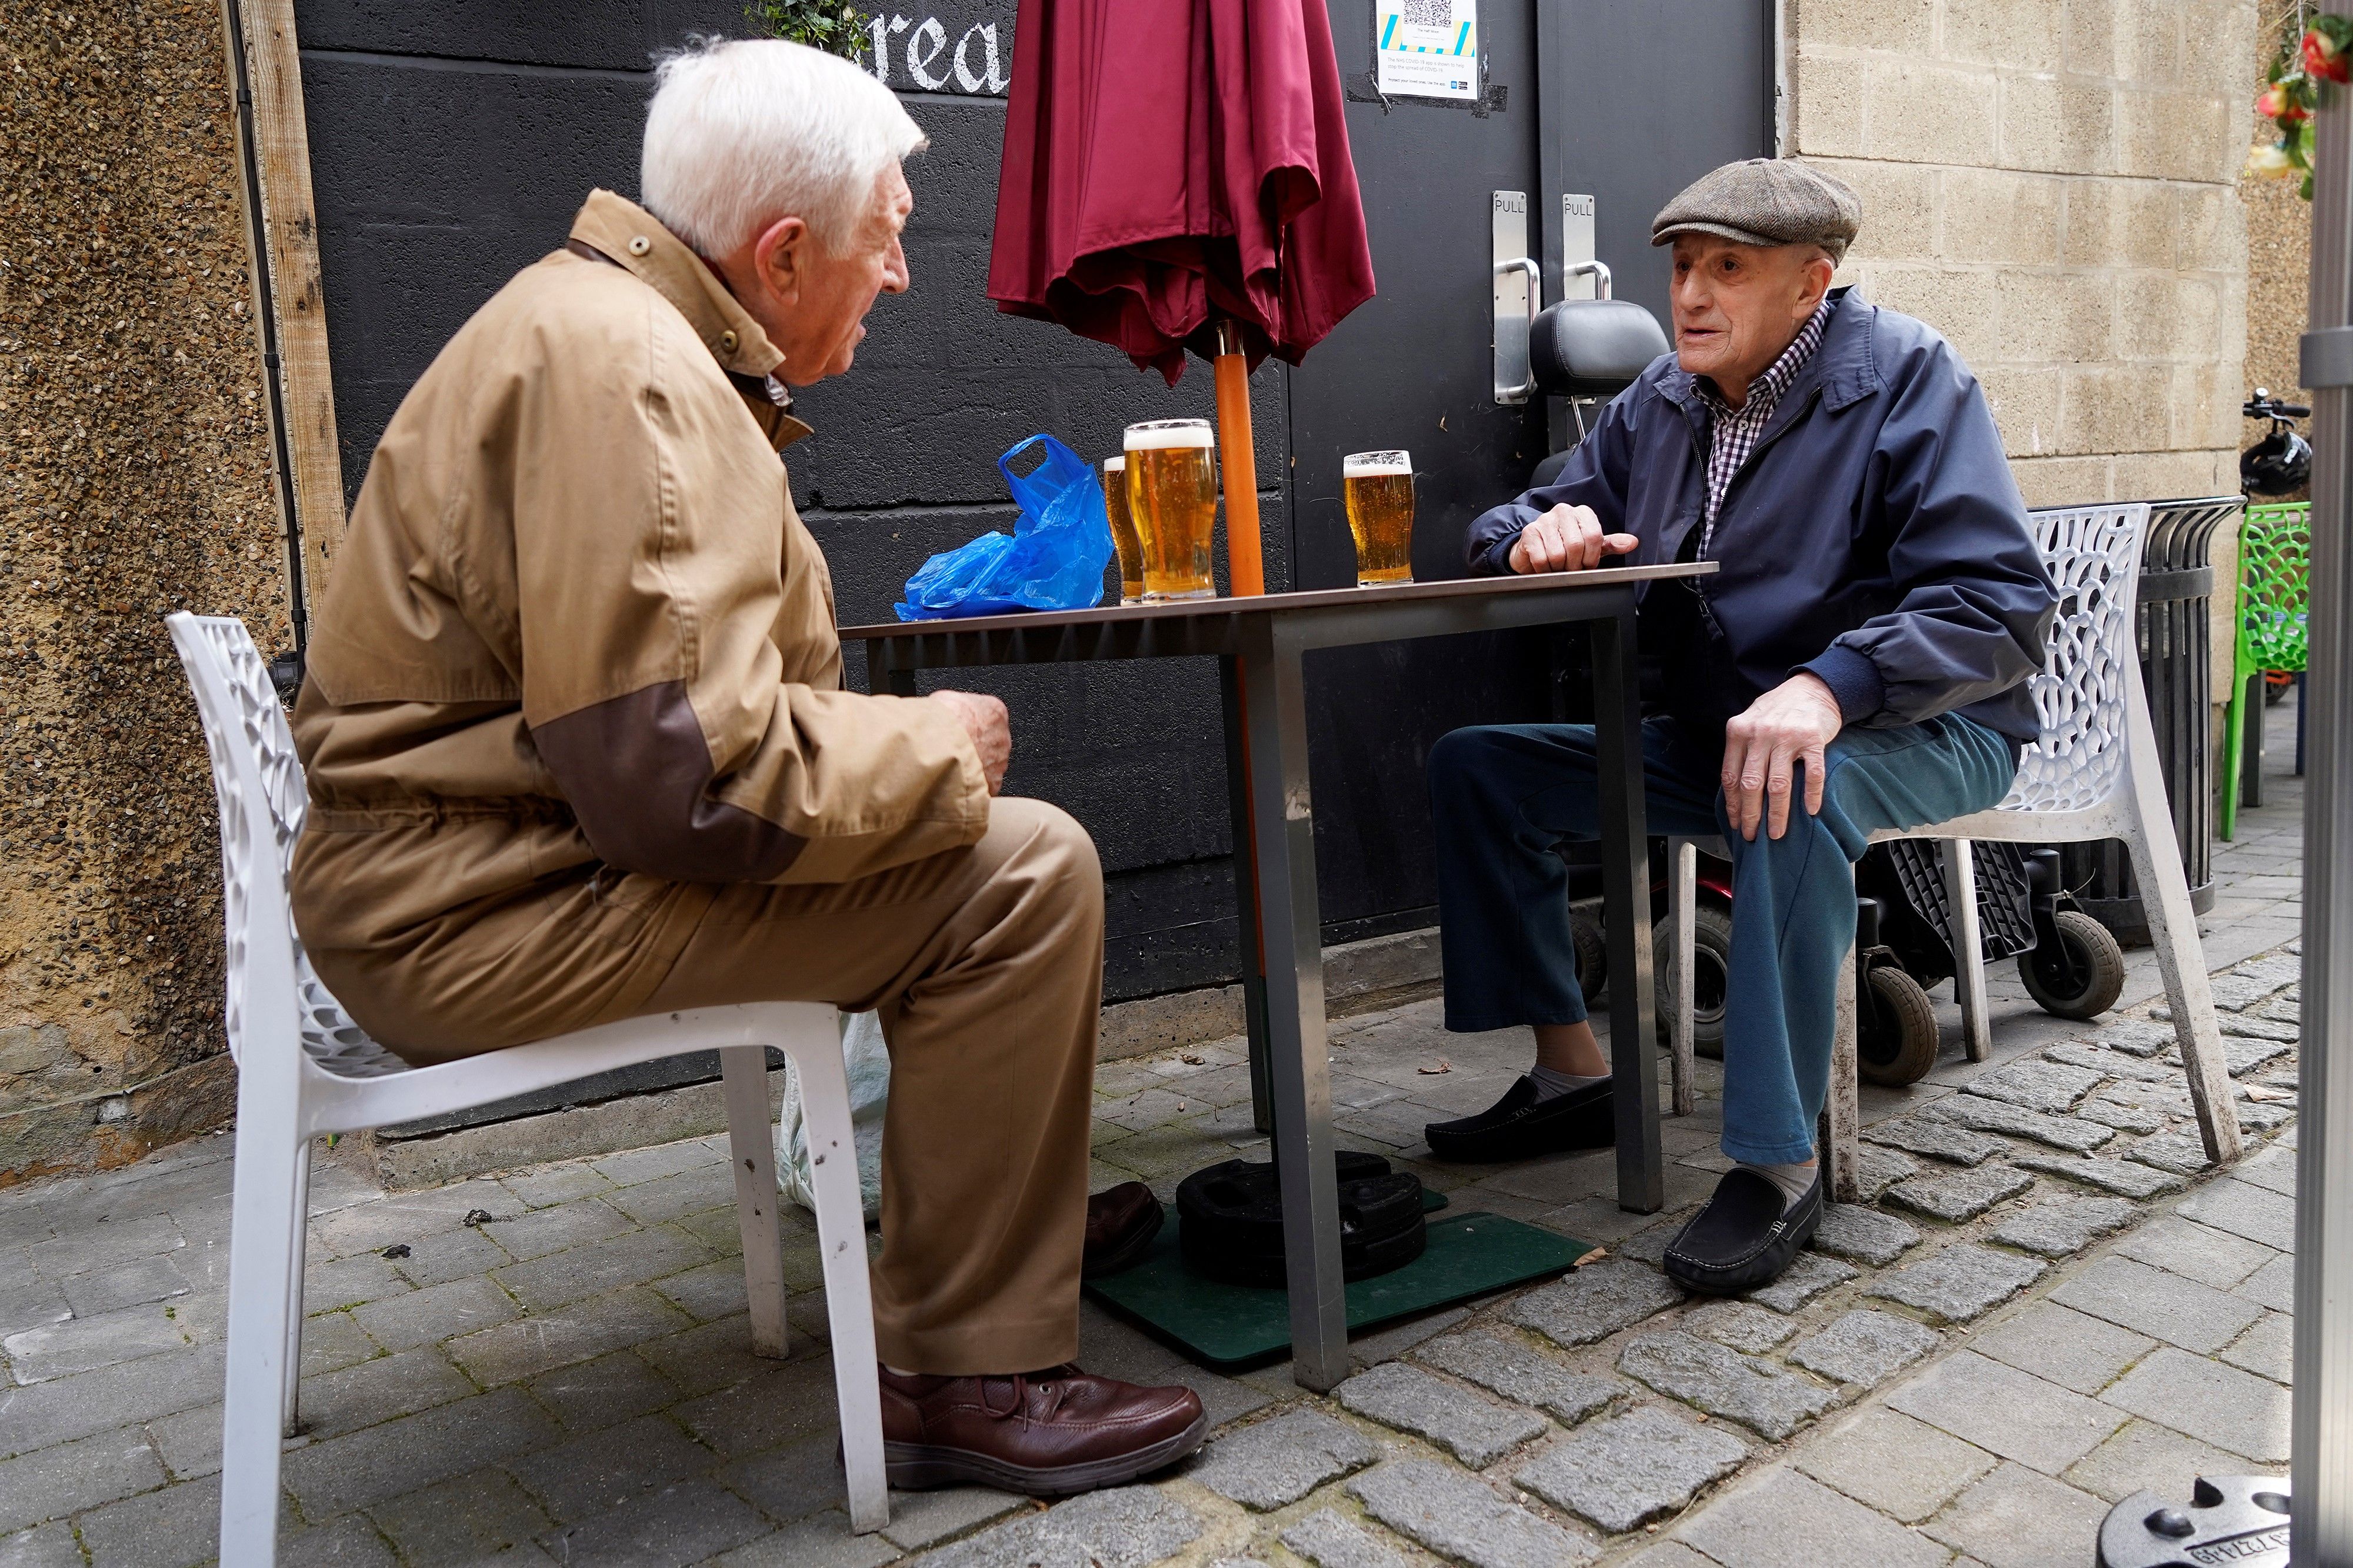 Two people sititng at a table and drinking.